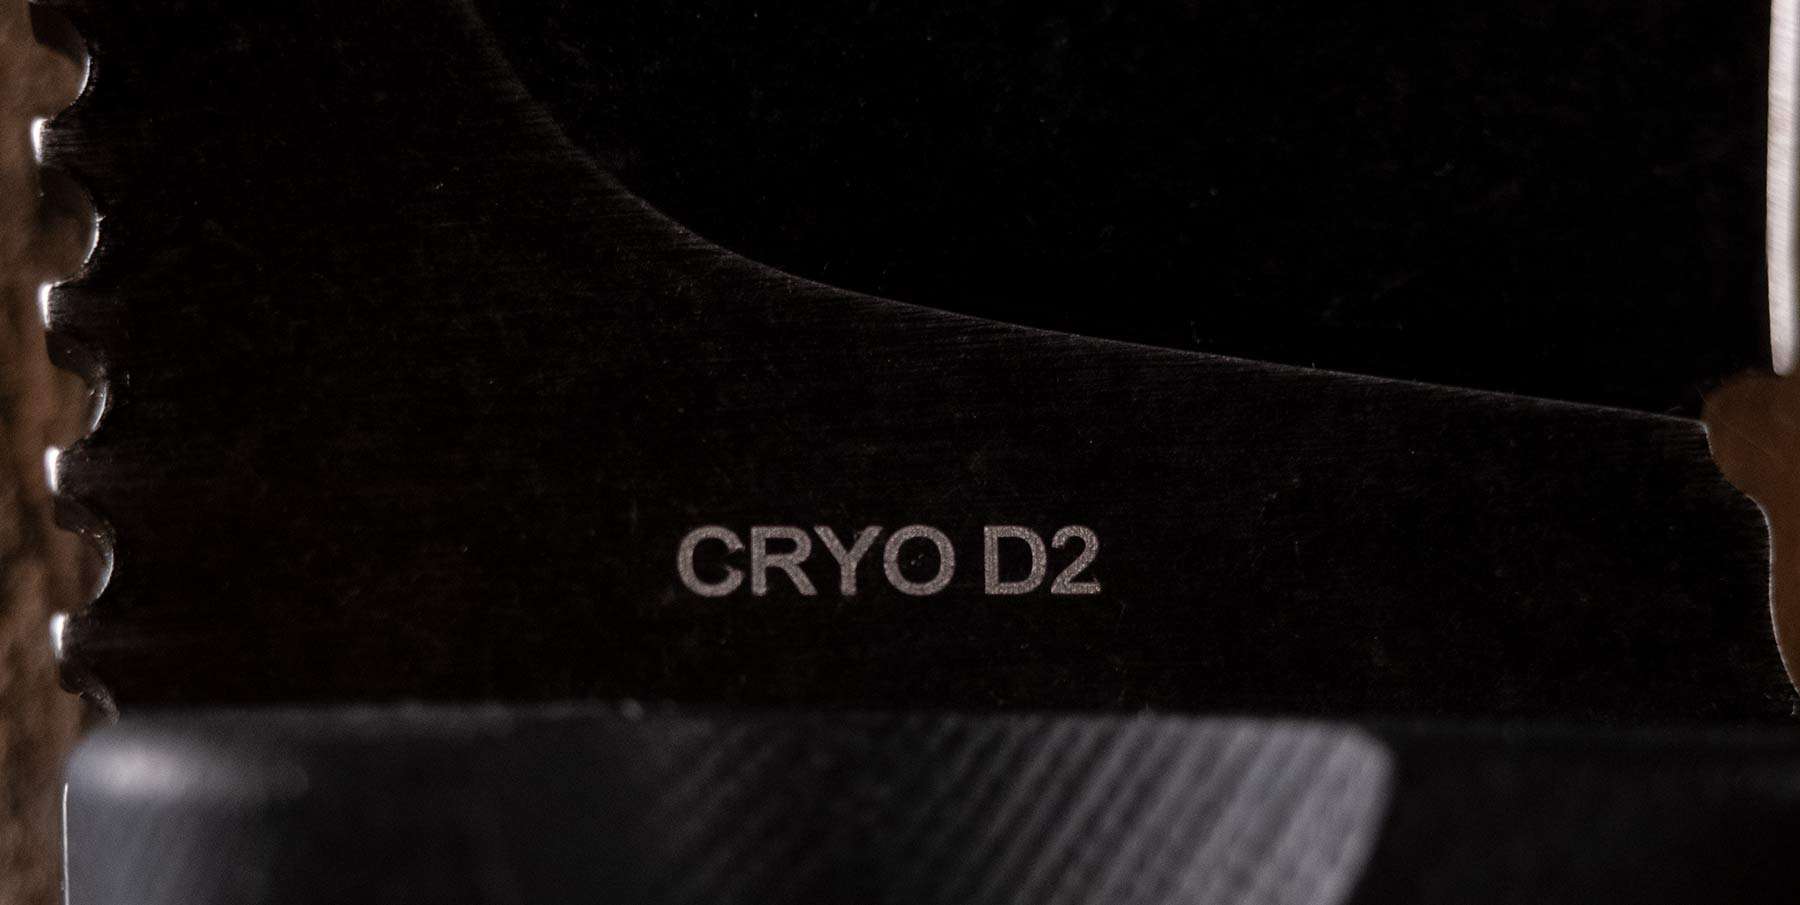 A close-up of the Cryo D2 steel logo on a fixed blade knife made by Off-Grid Knives.